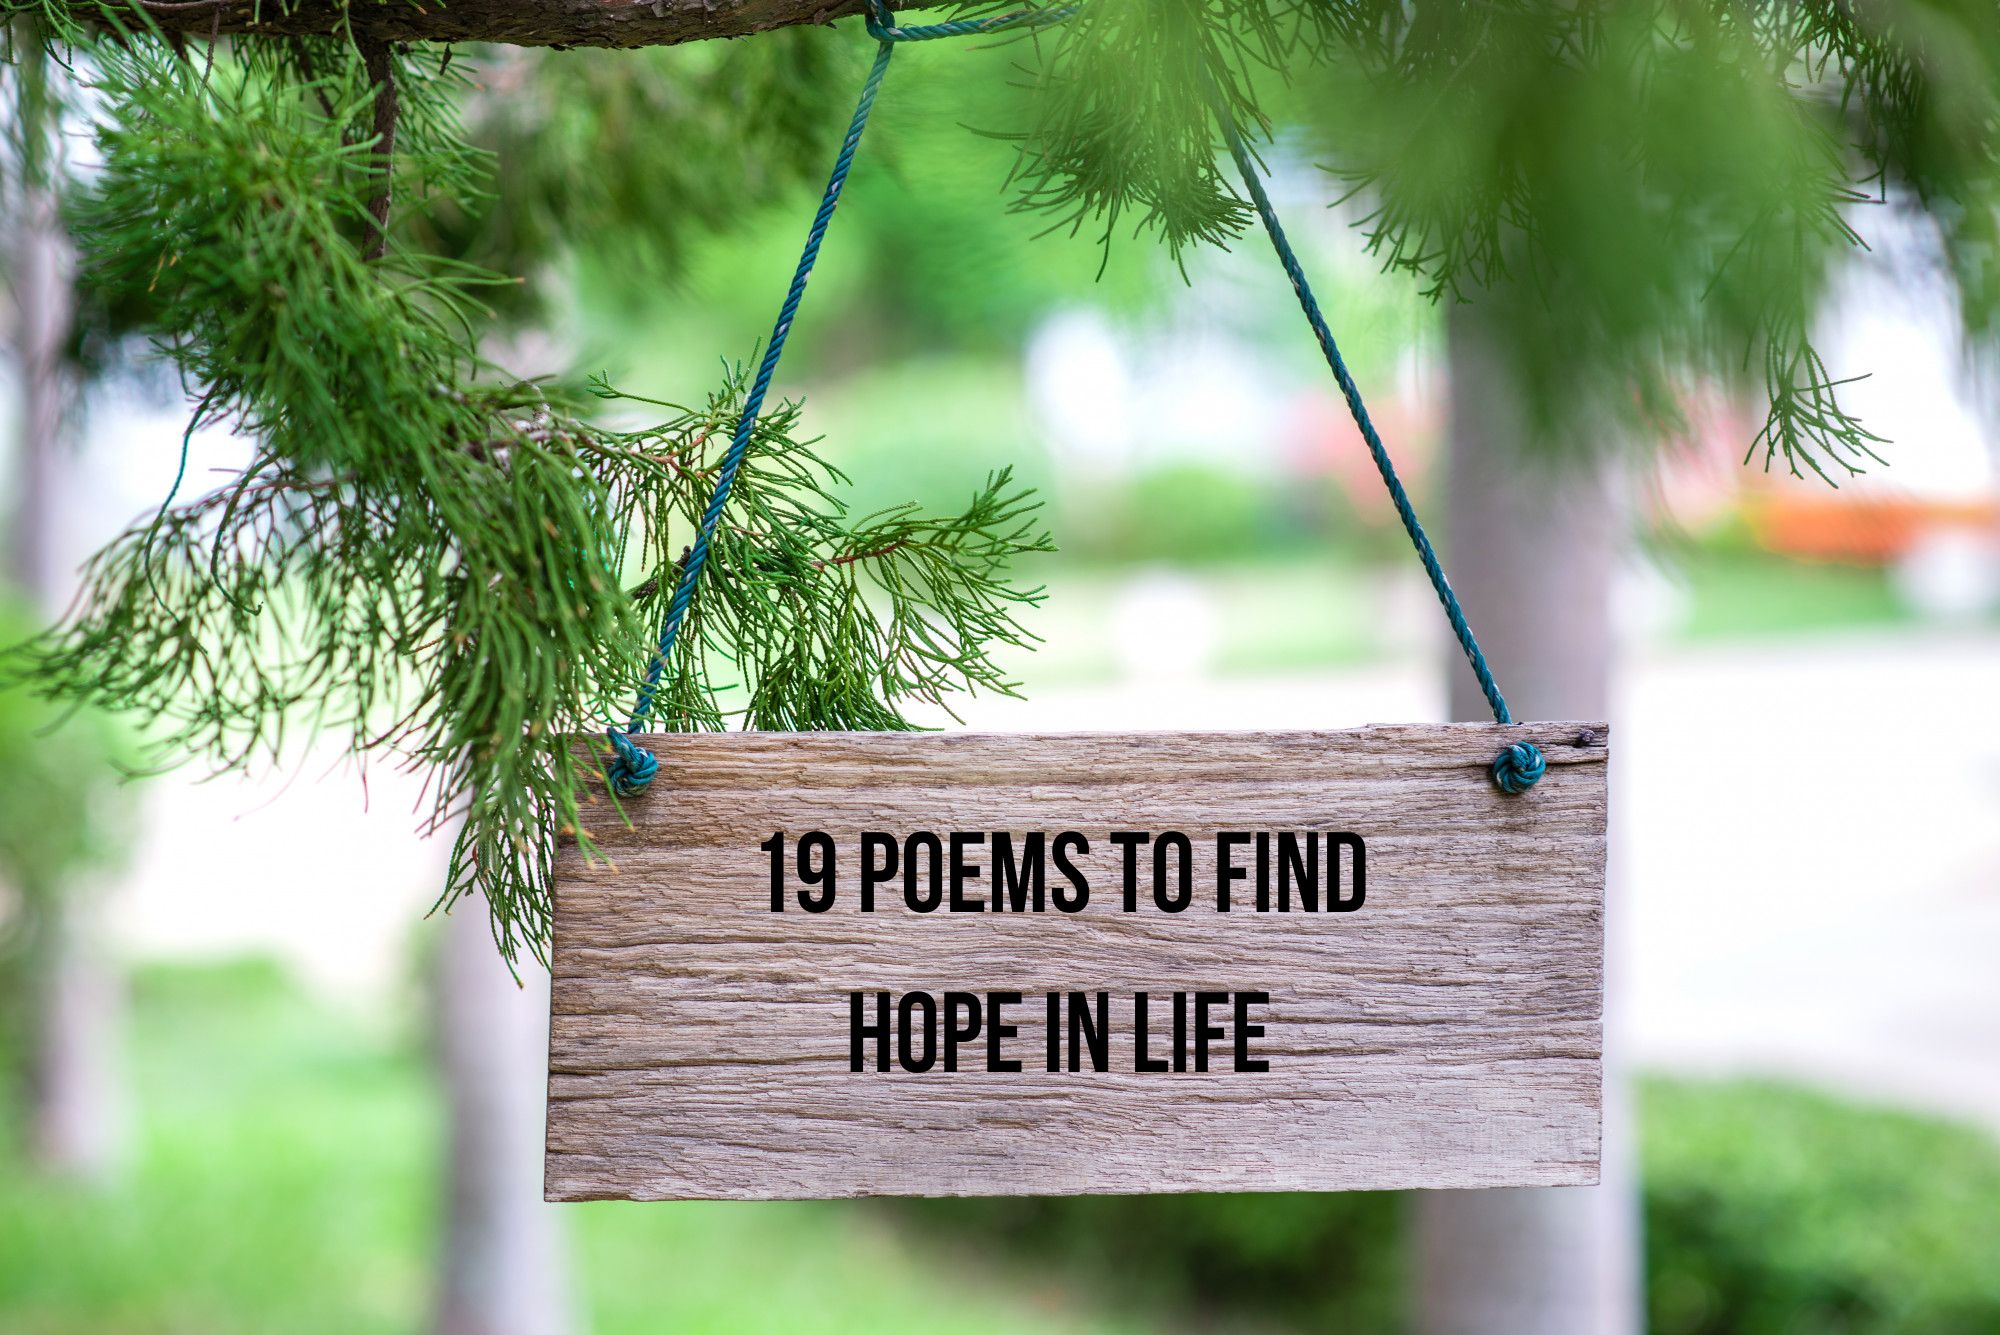 19 Poems to find hope in life